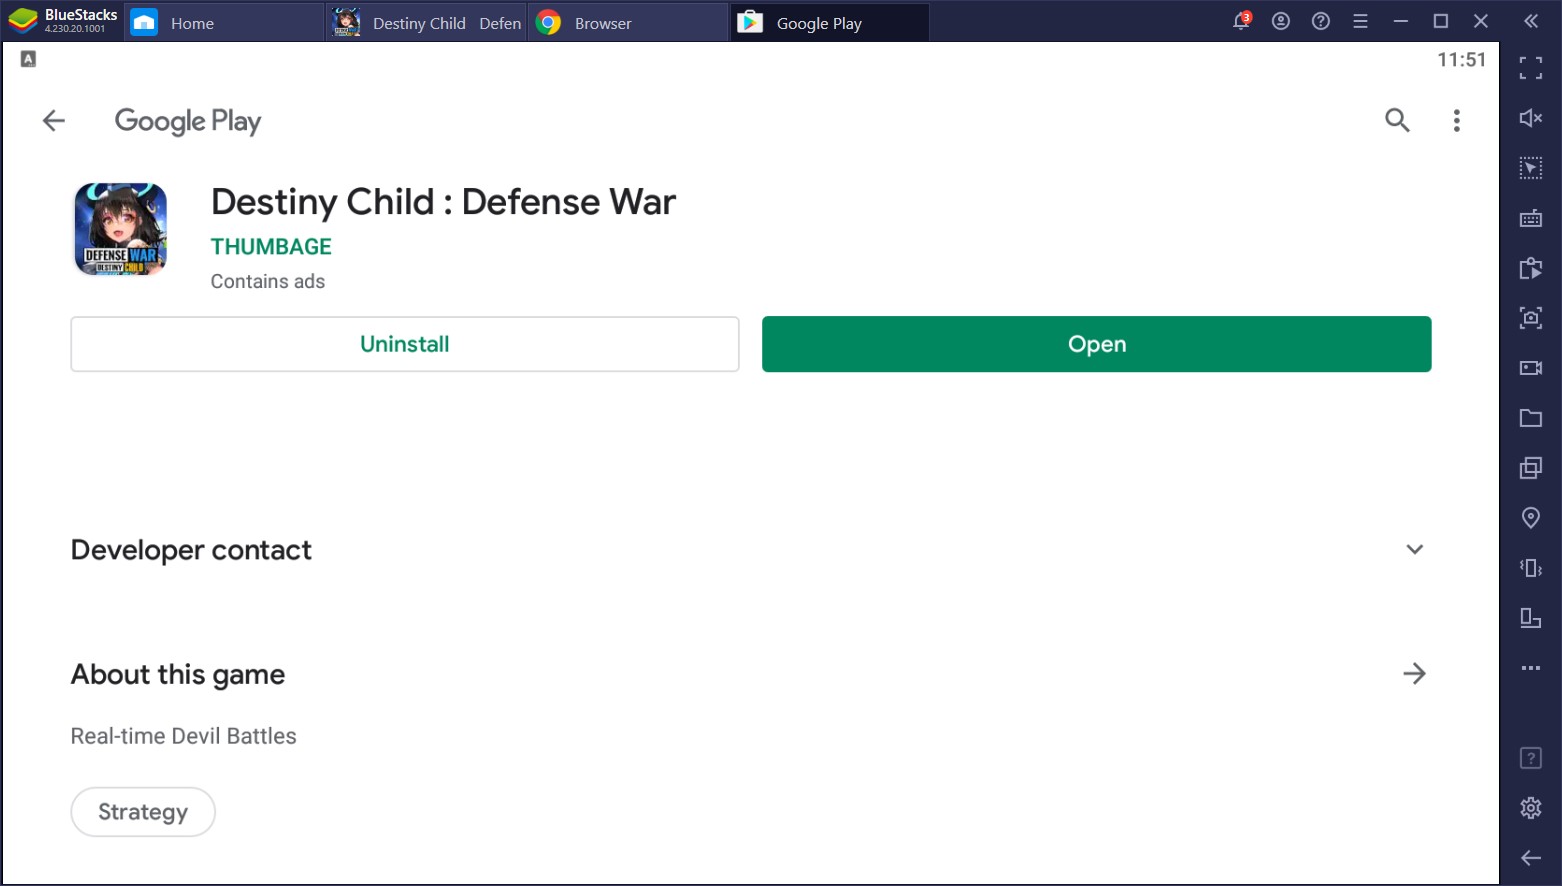 Destiny Child: Defense War Tower Defense Game Now Available on PC with BlueStacks